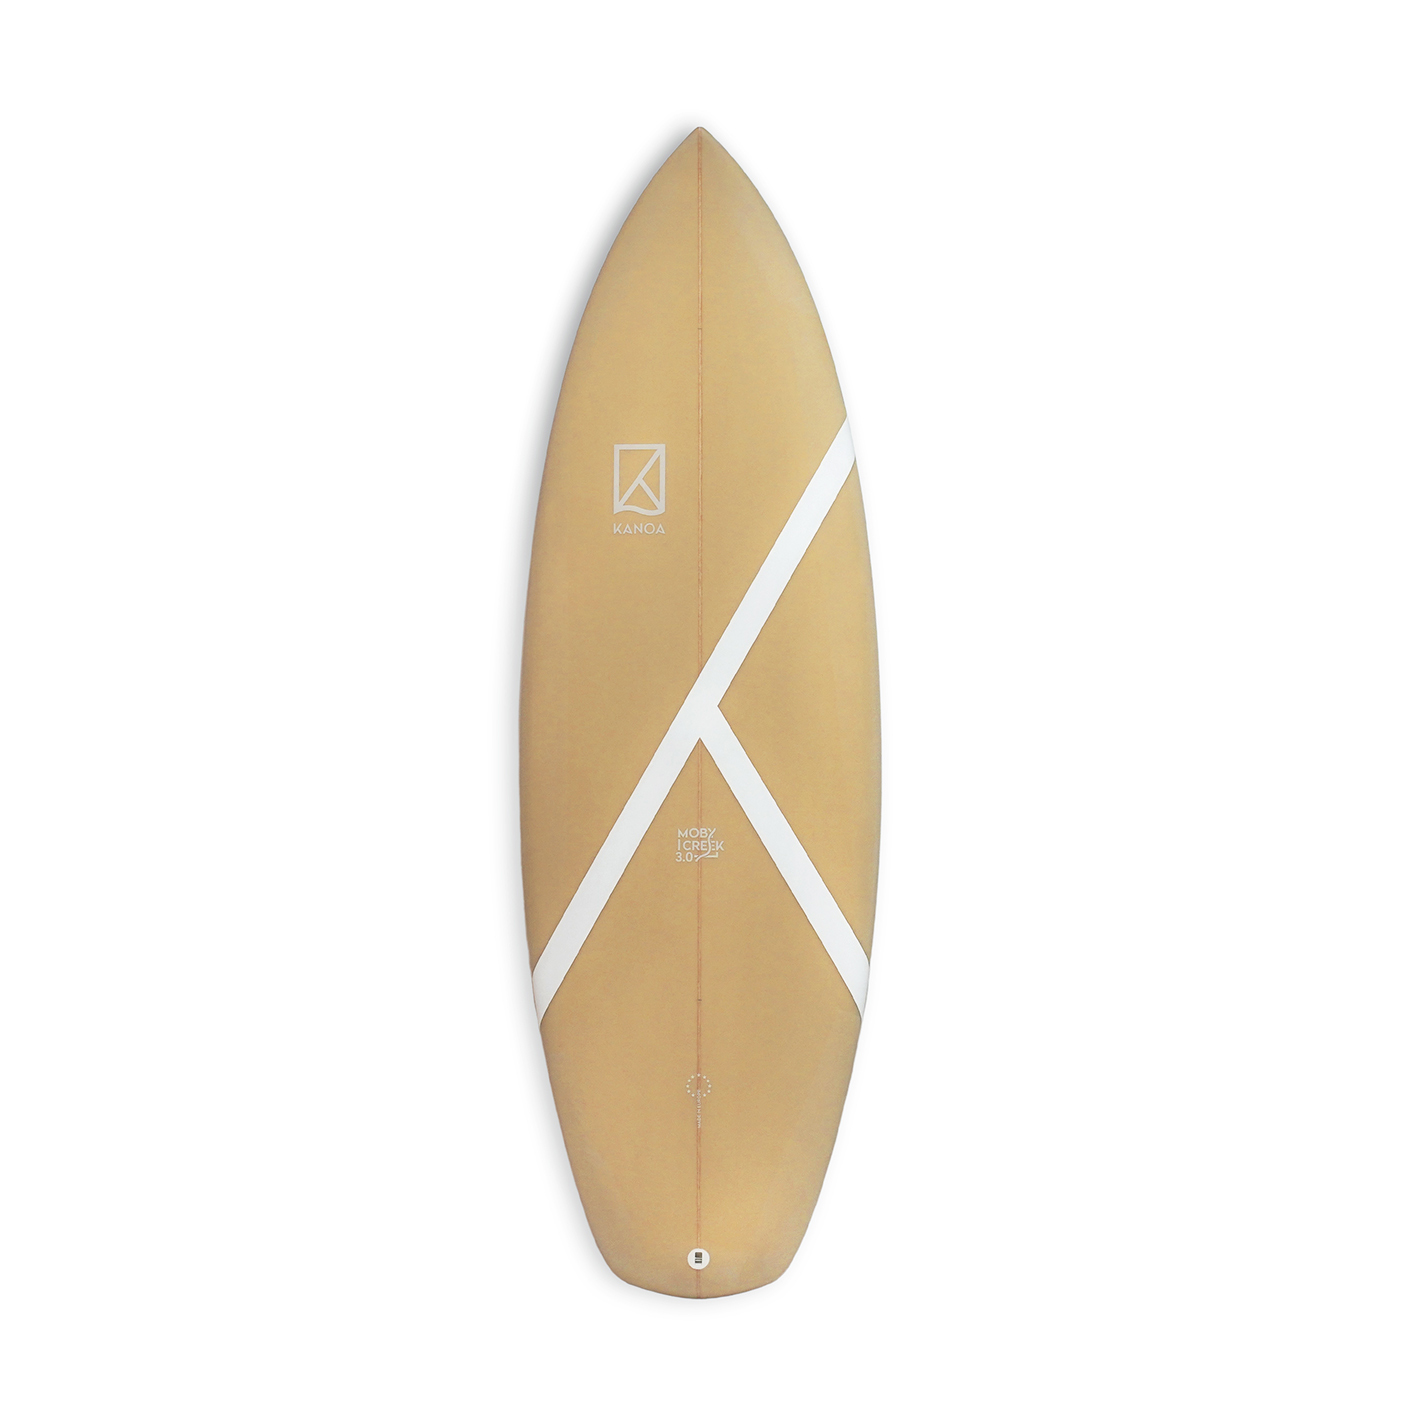 Discover our Moby Creek 3.0 Performance Riverboard Surfboard with sustainable and durable construction 